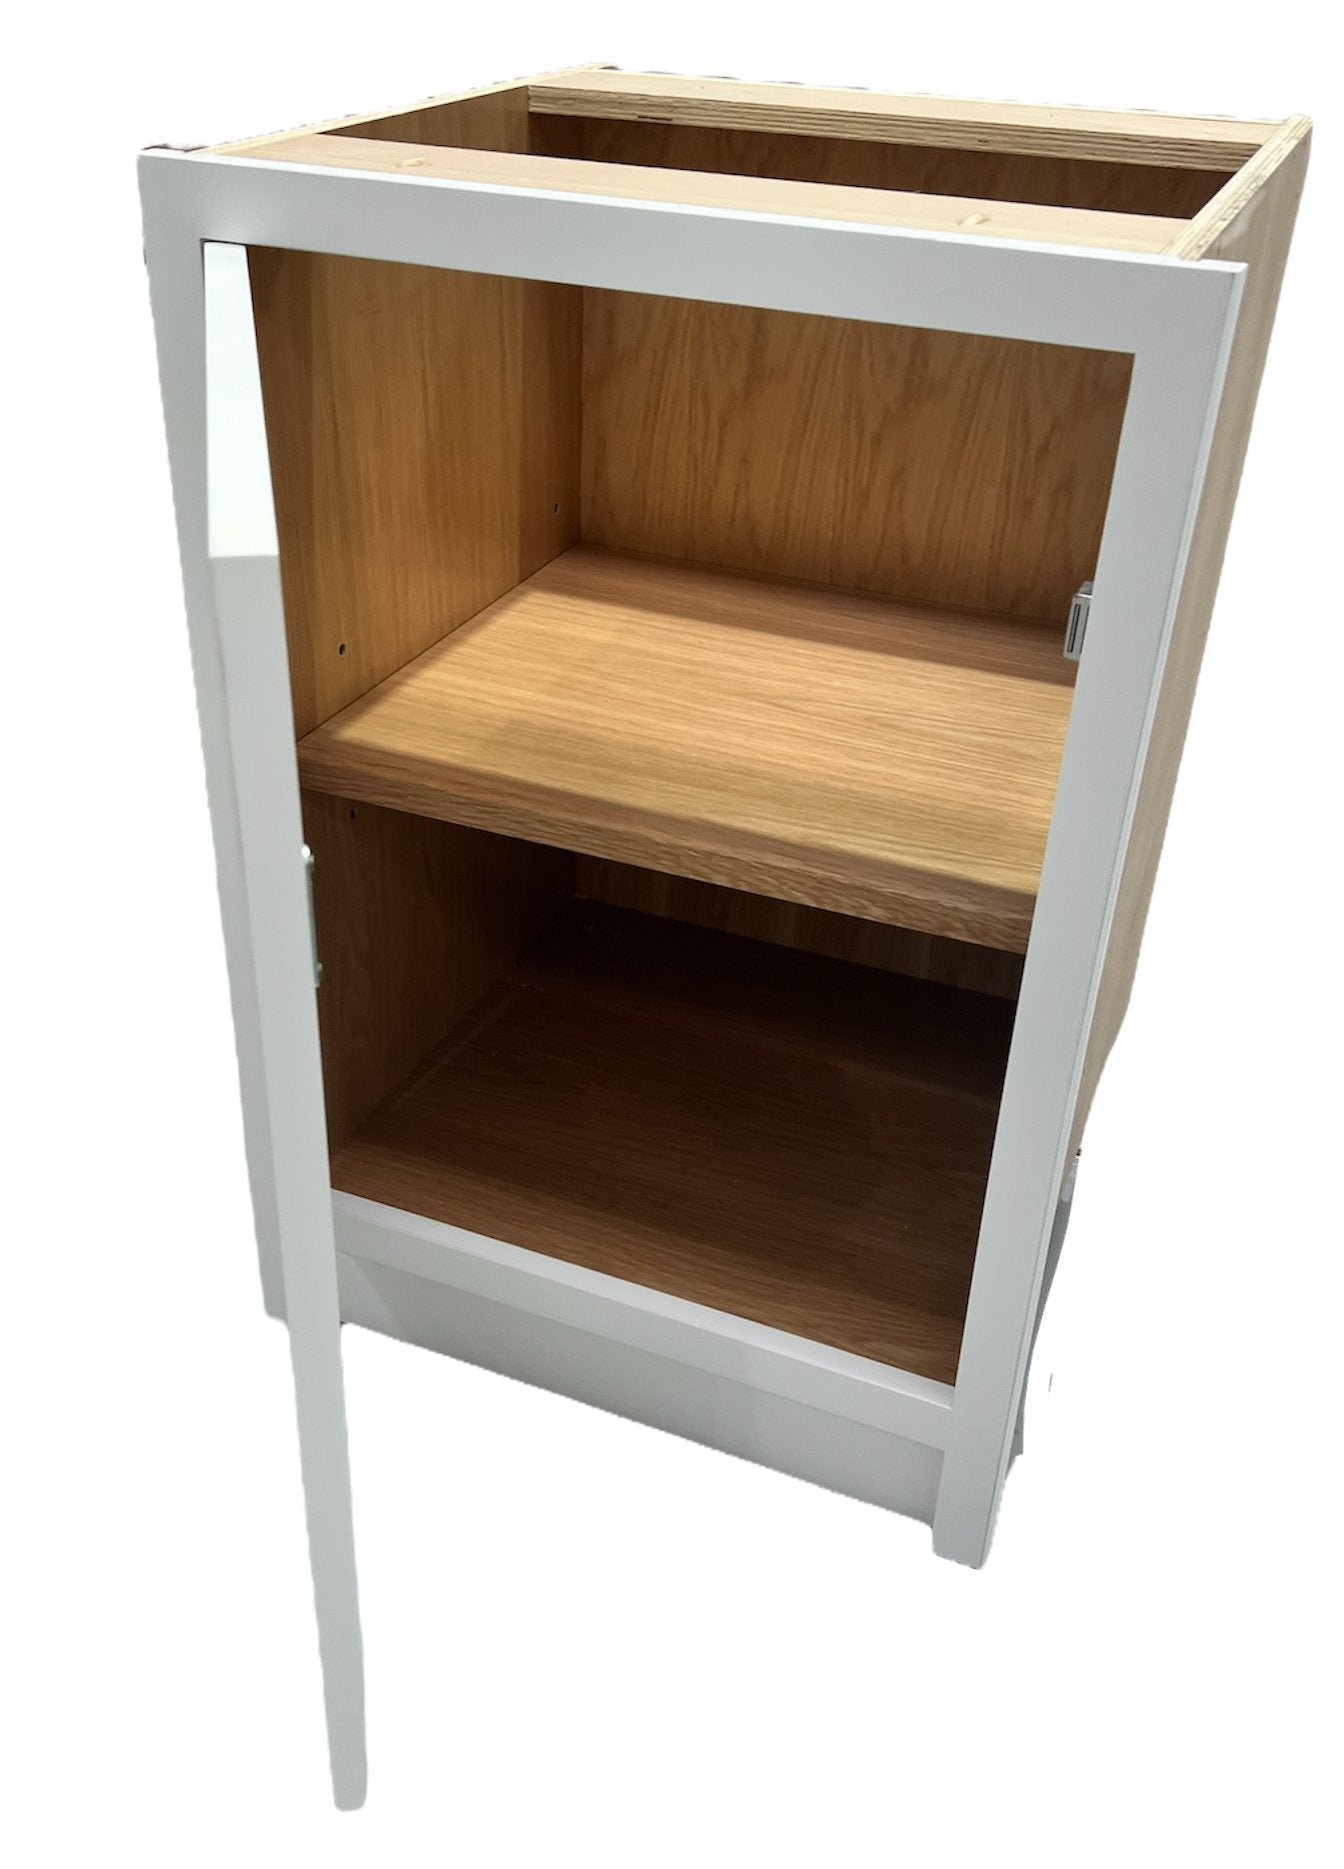 BH 400 - 400mm Highline single door base unit - Classic Kitchens Direct